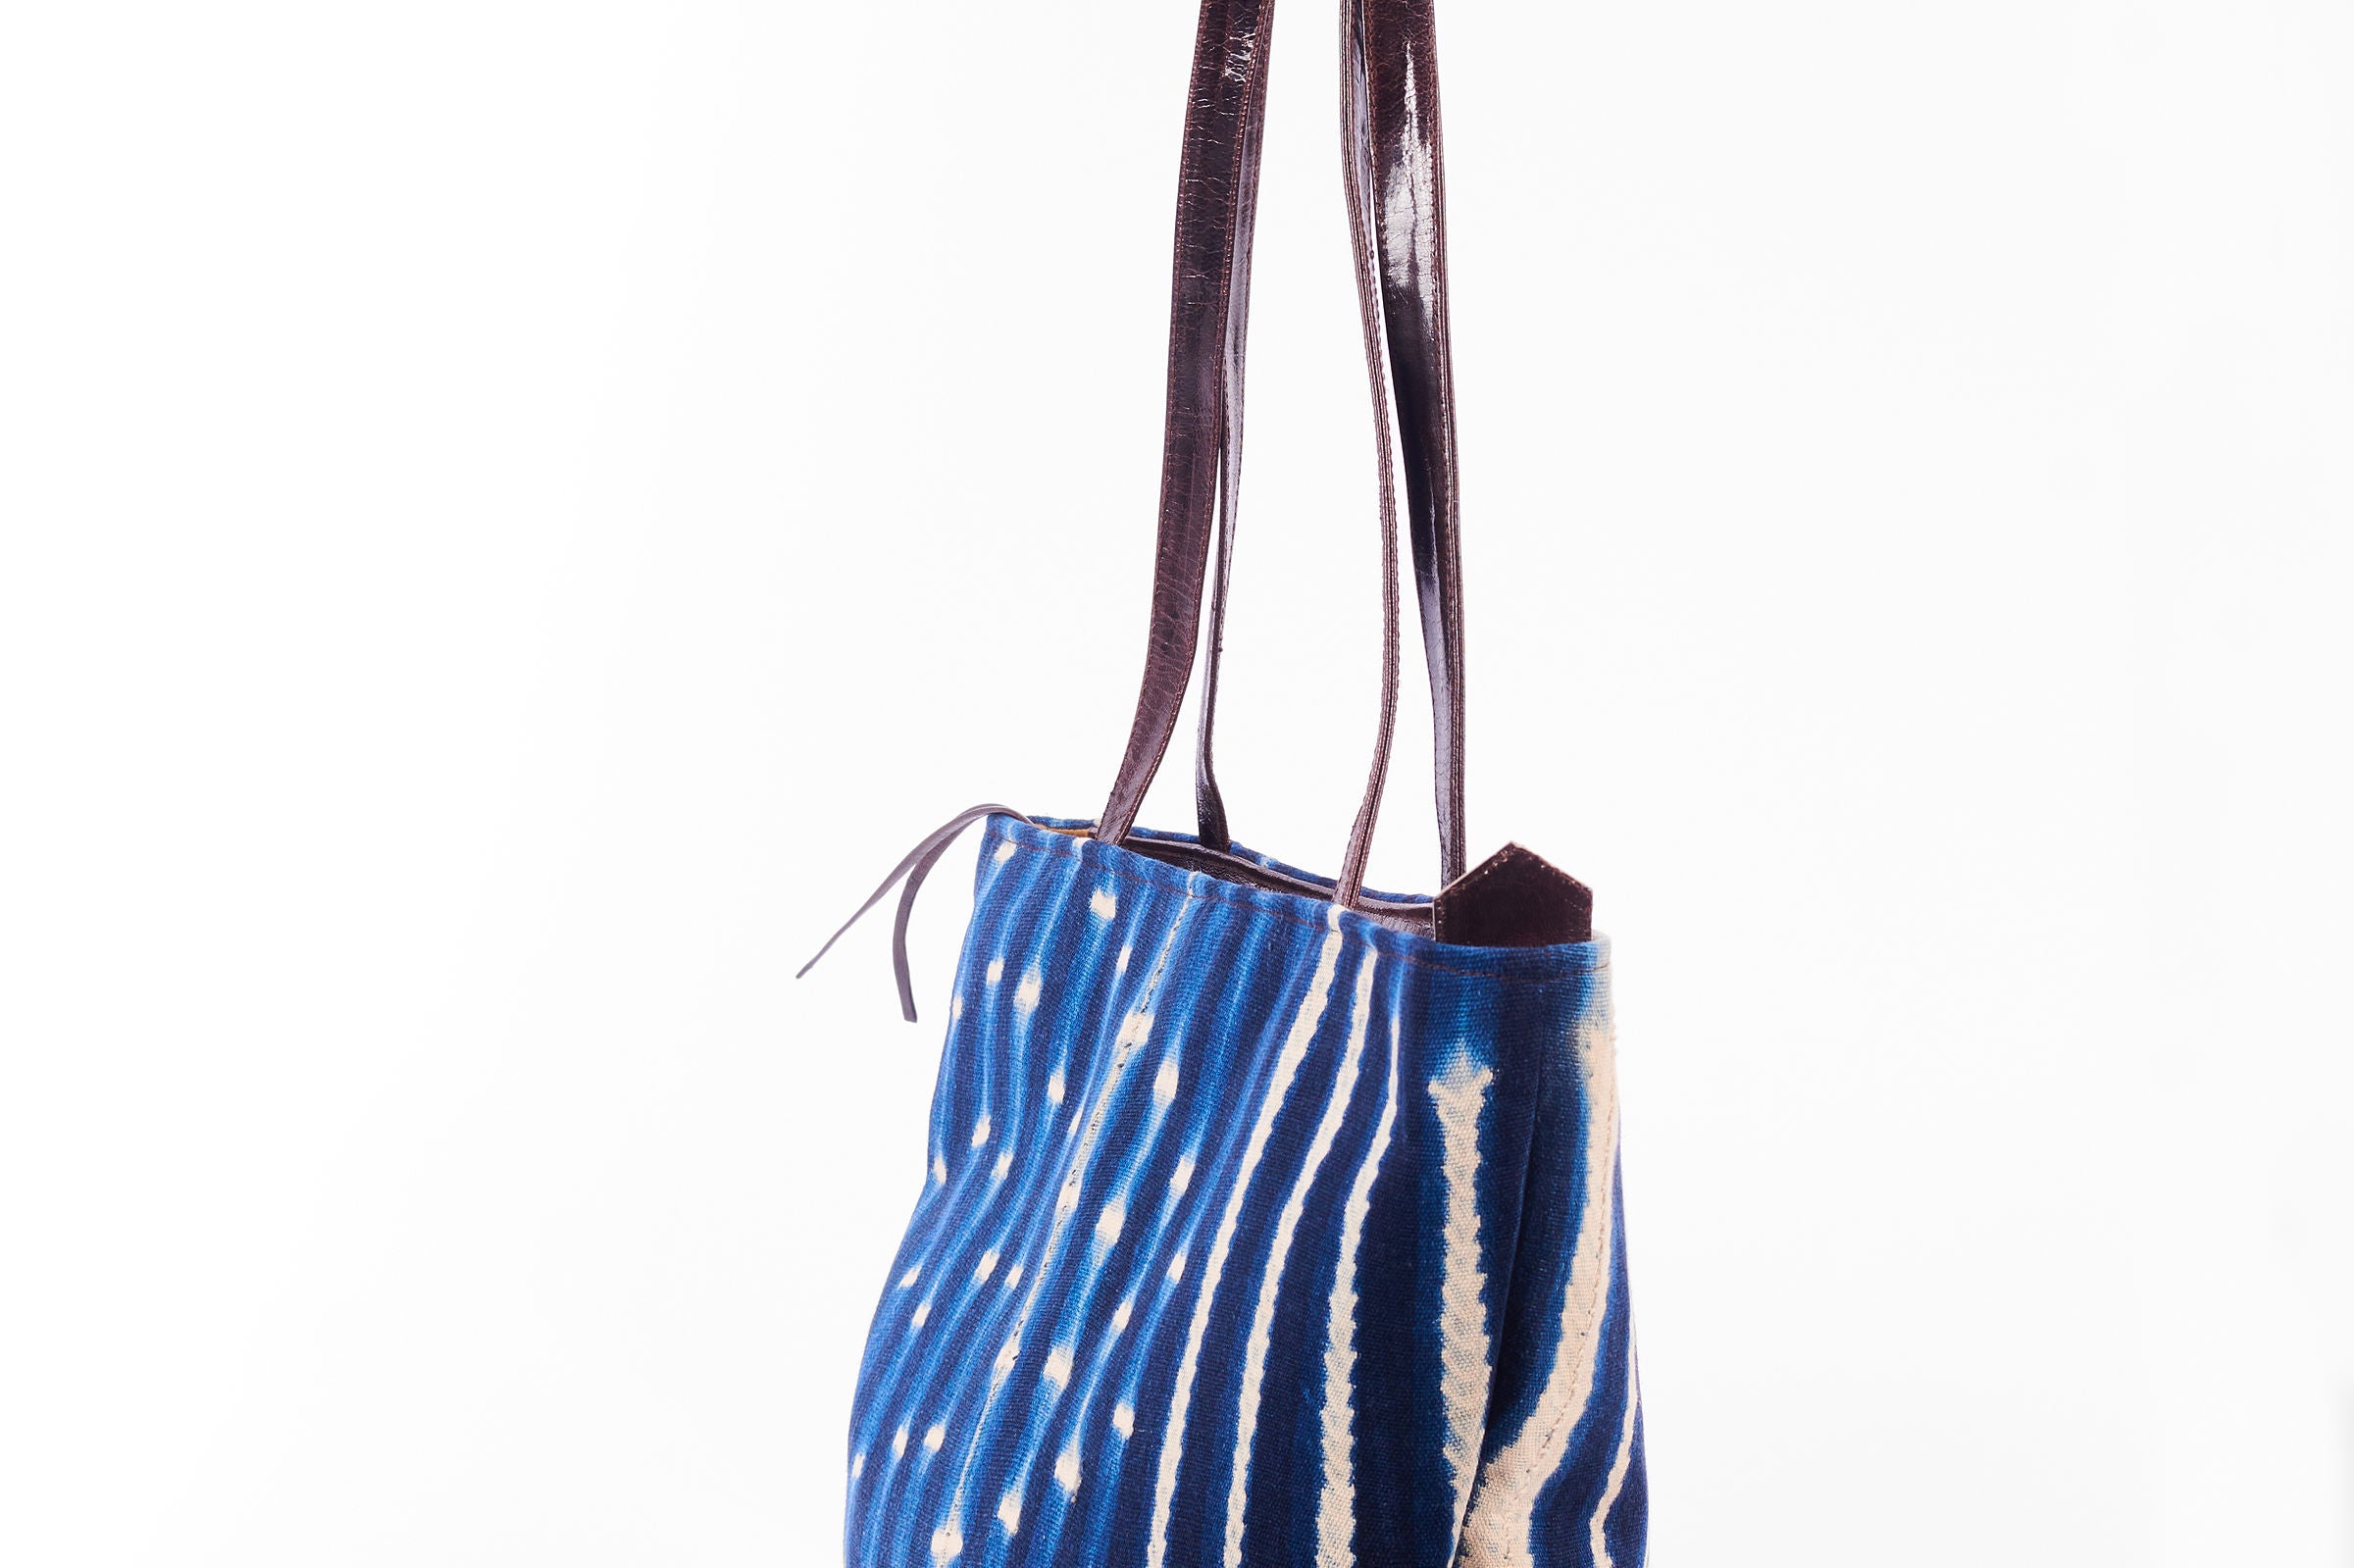 Hand-dyed indigo fabric and leather Tema tote bag by GEOMETRIC. 